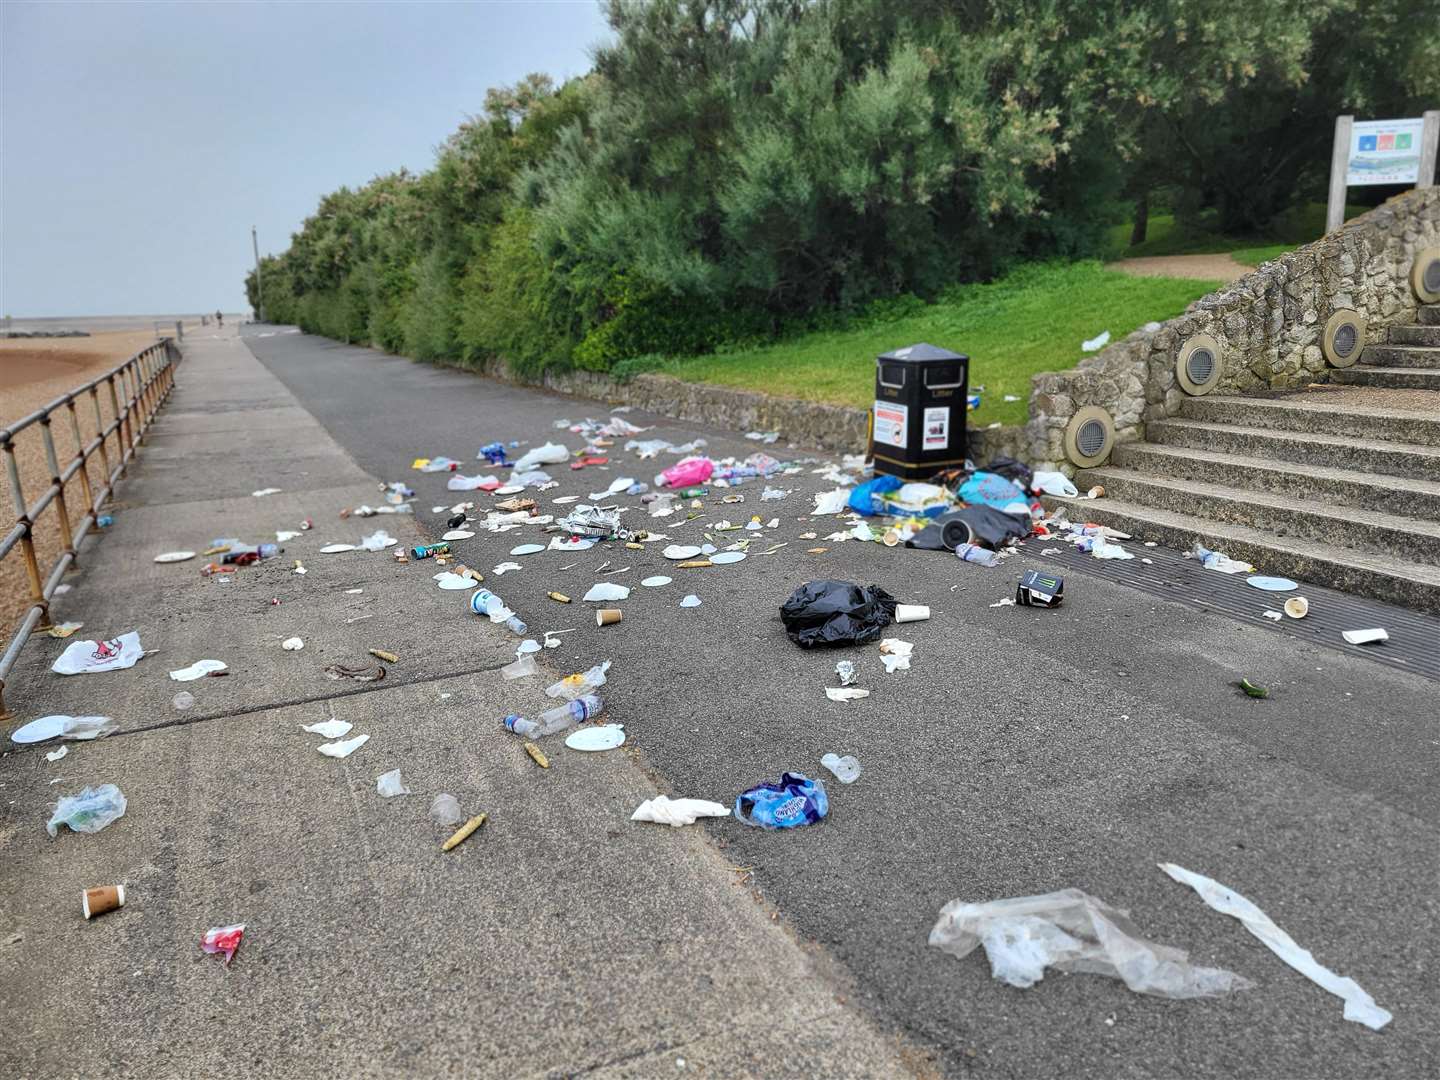 Folkestone seafront has been branded a "bomb site" following stacks of litter left after warm weather. Picture: Liam Godfrey